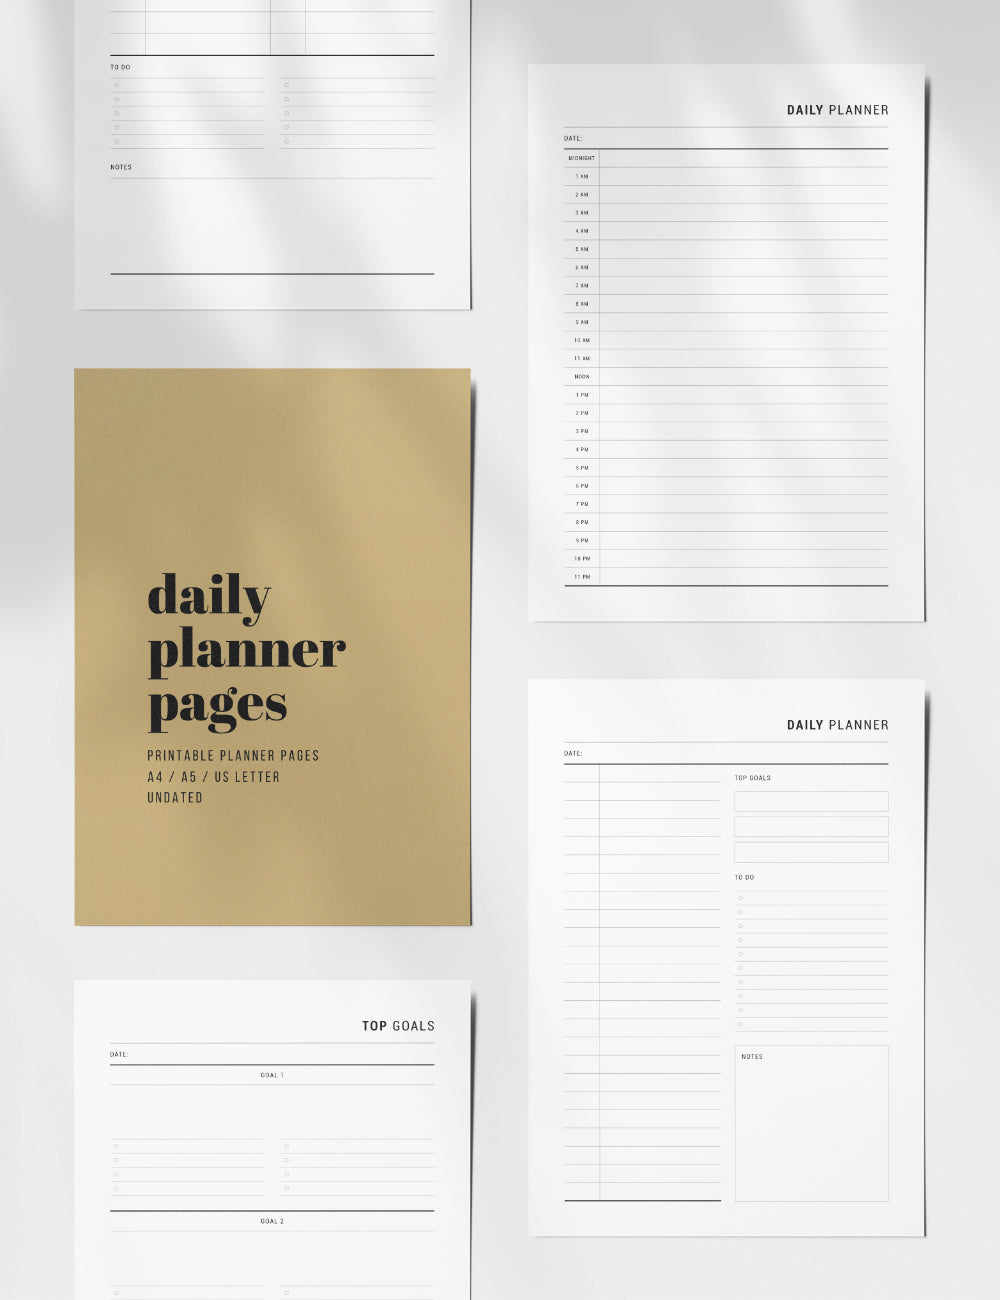 Daily To-Do List,Daily Planner,Daily Agenda,Daily Schedule,Daily Tracker,Daily Organizer,Daily Pages,A4,A5,Us Letter